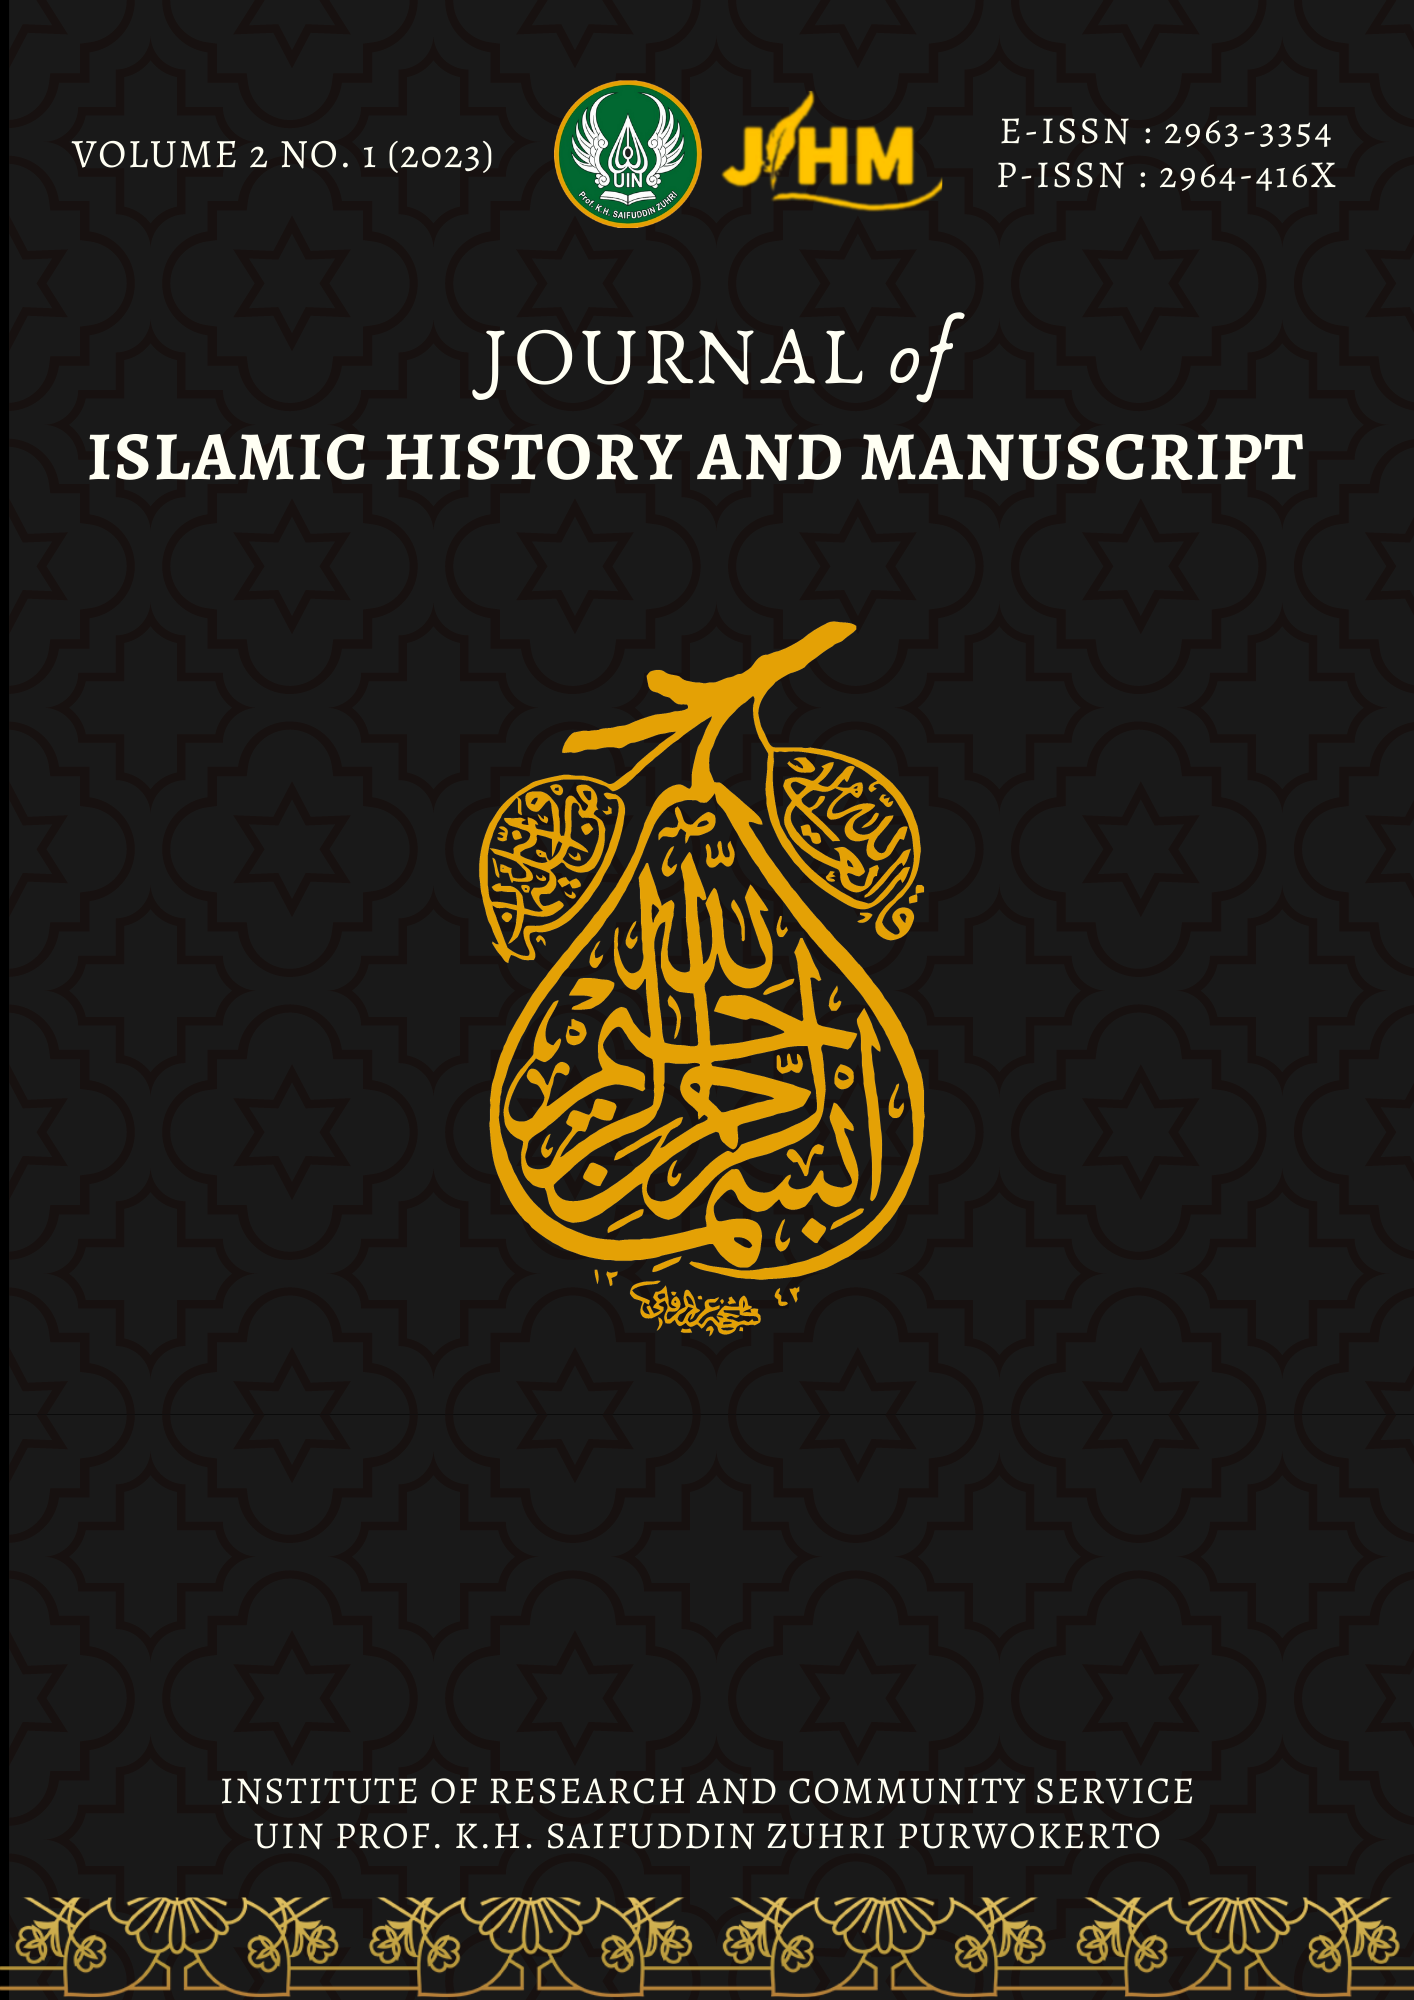 					View Vol. 2 No. 1 (2023): Journal of Islamic History and Manuscript
				